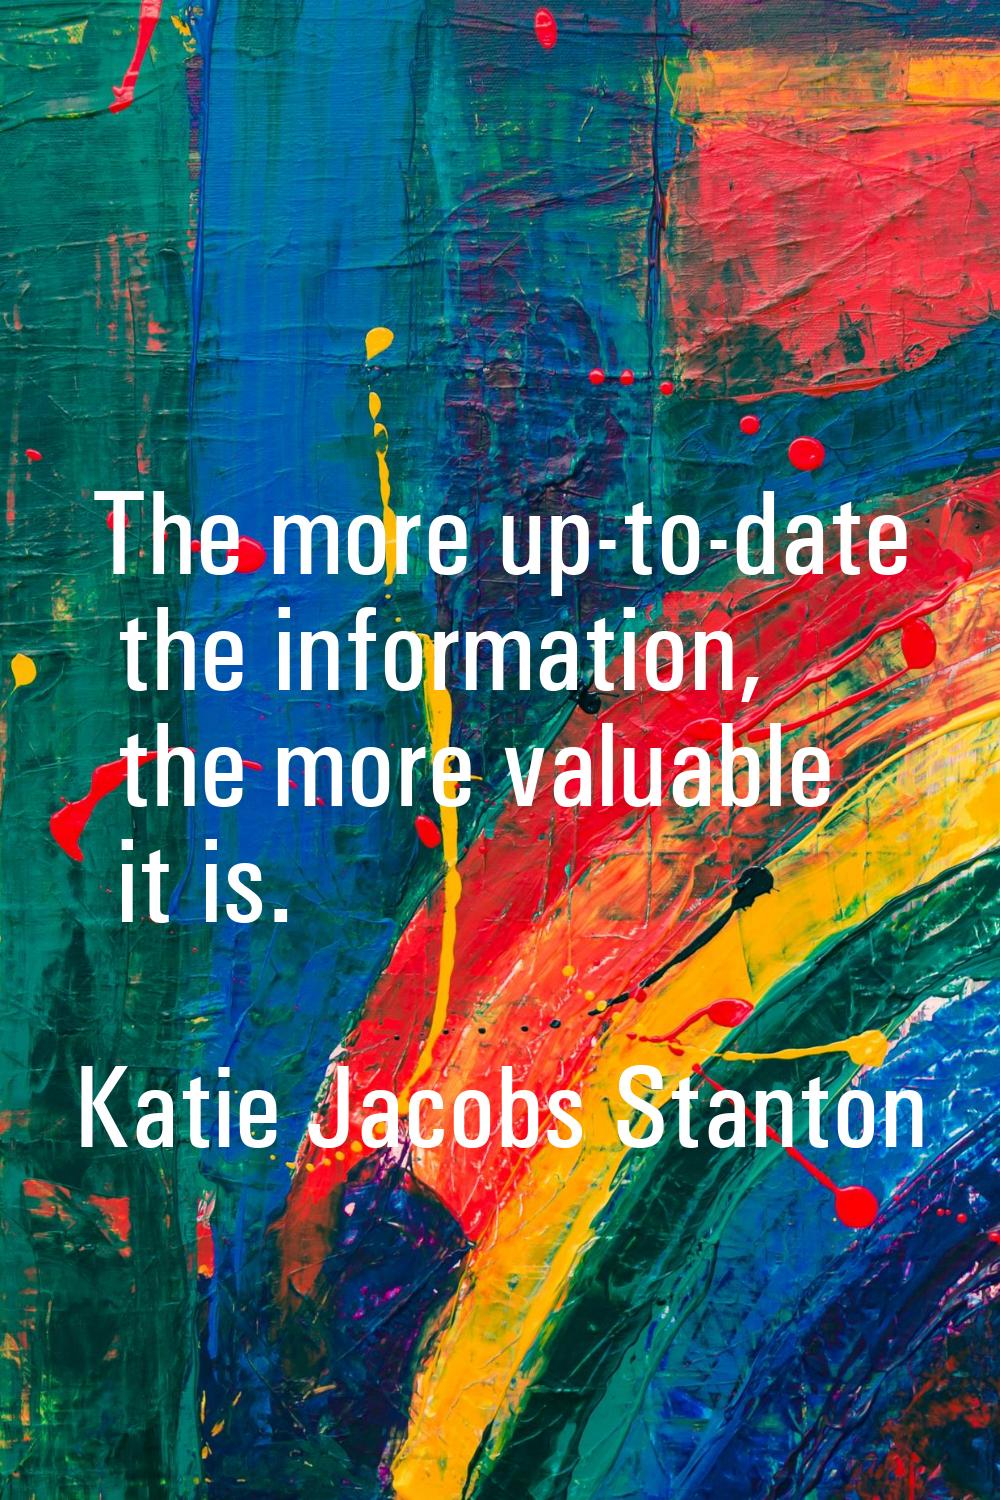 The more up-to-date the information, the more valuable it is.